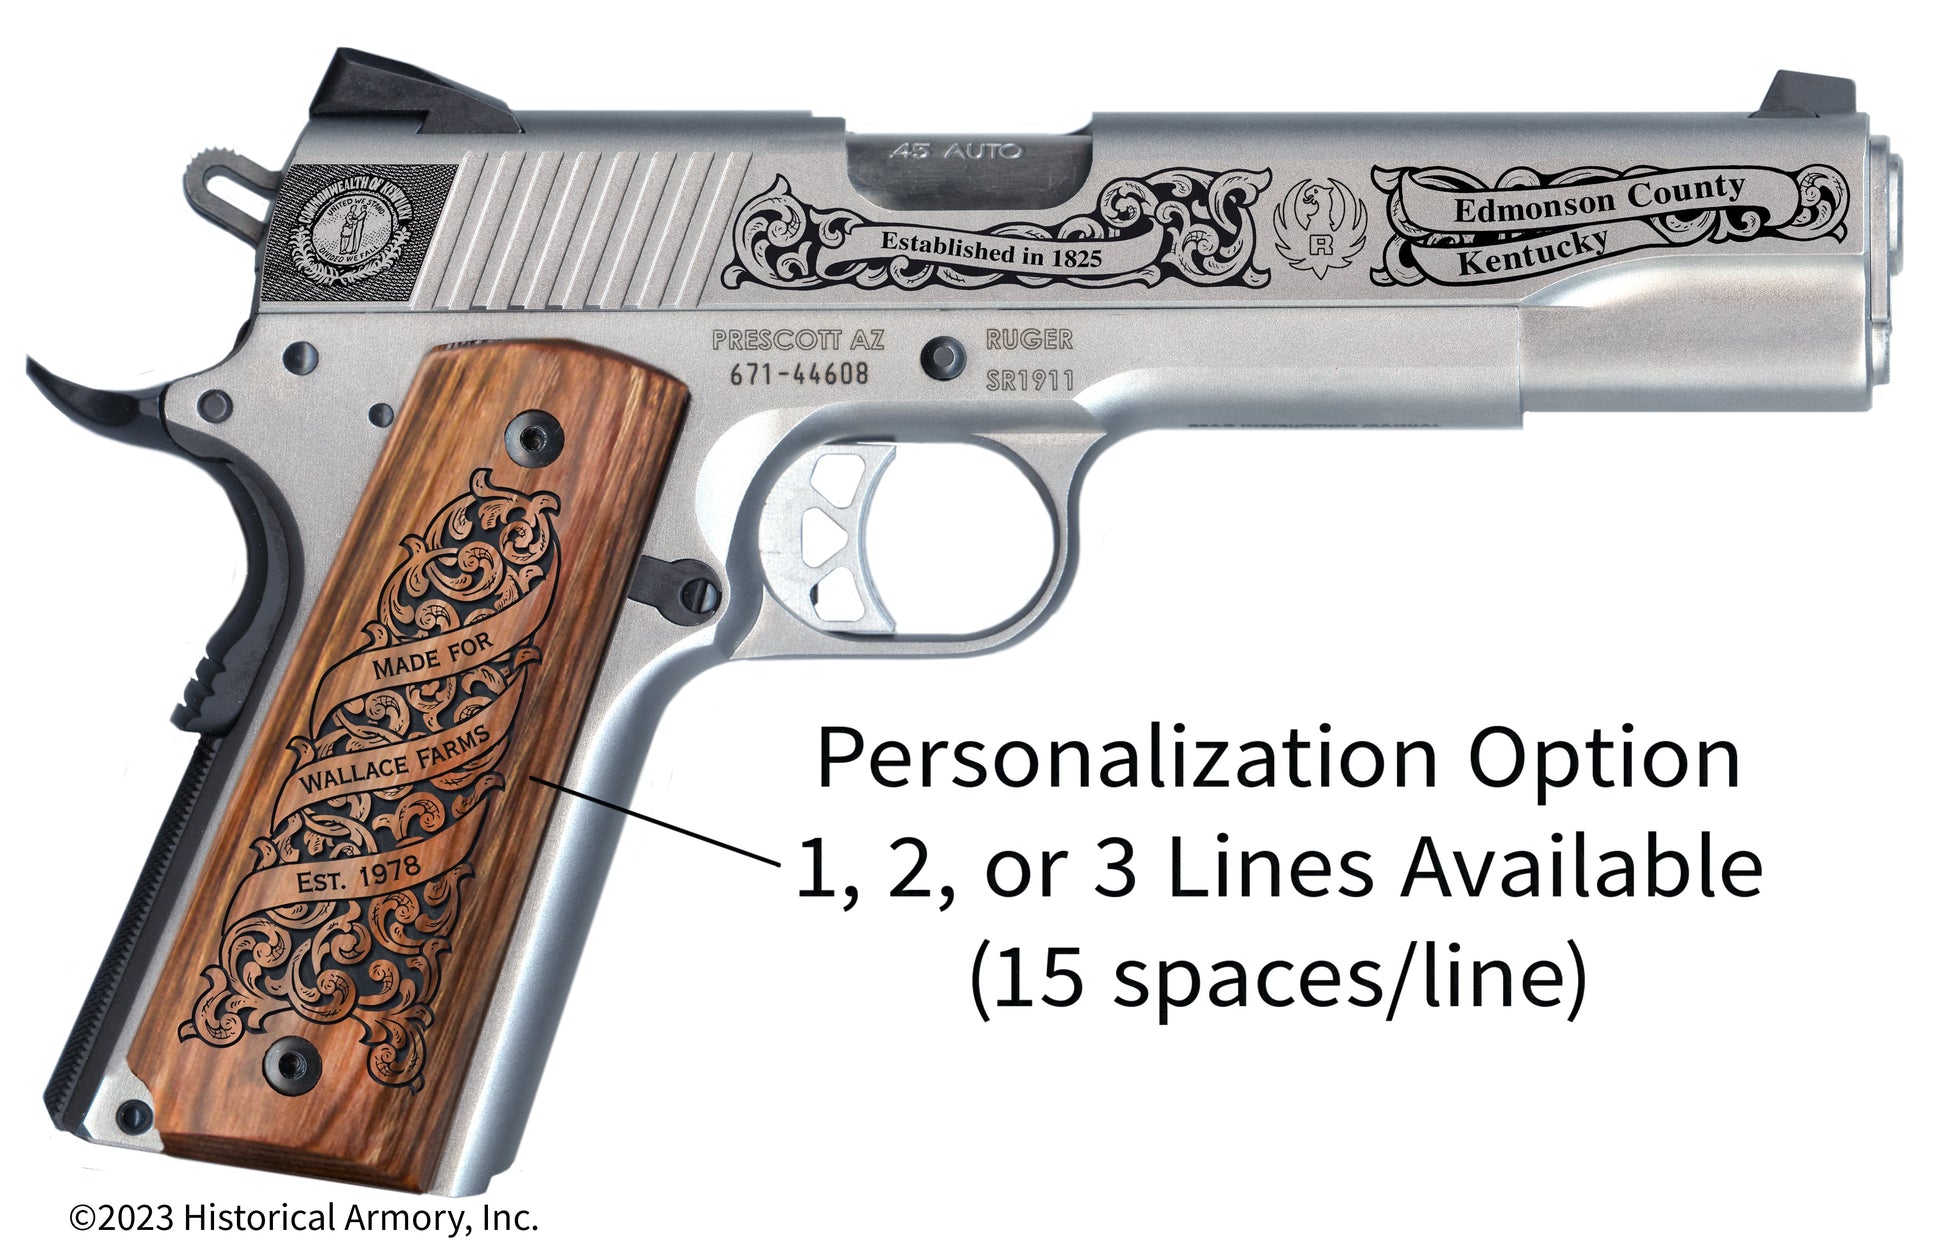 Edmonson County Kentucky Personalized Engraved .45 Auto Ruger 1911